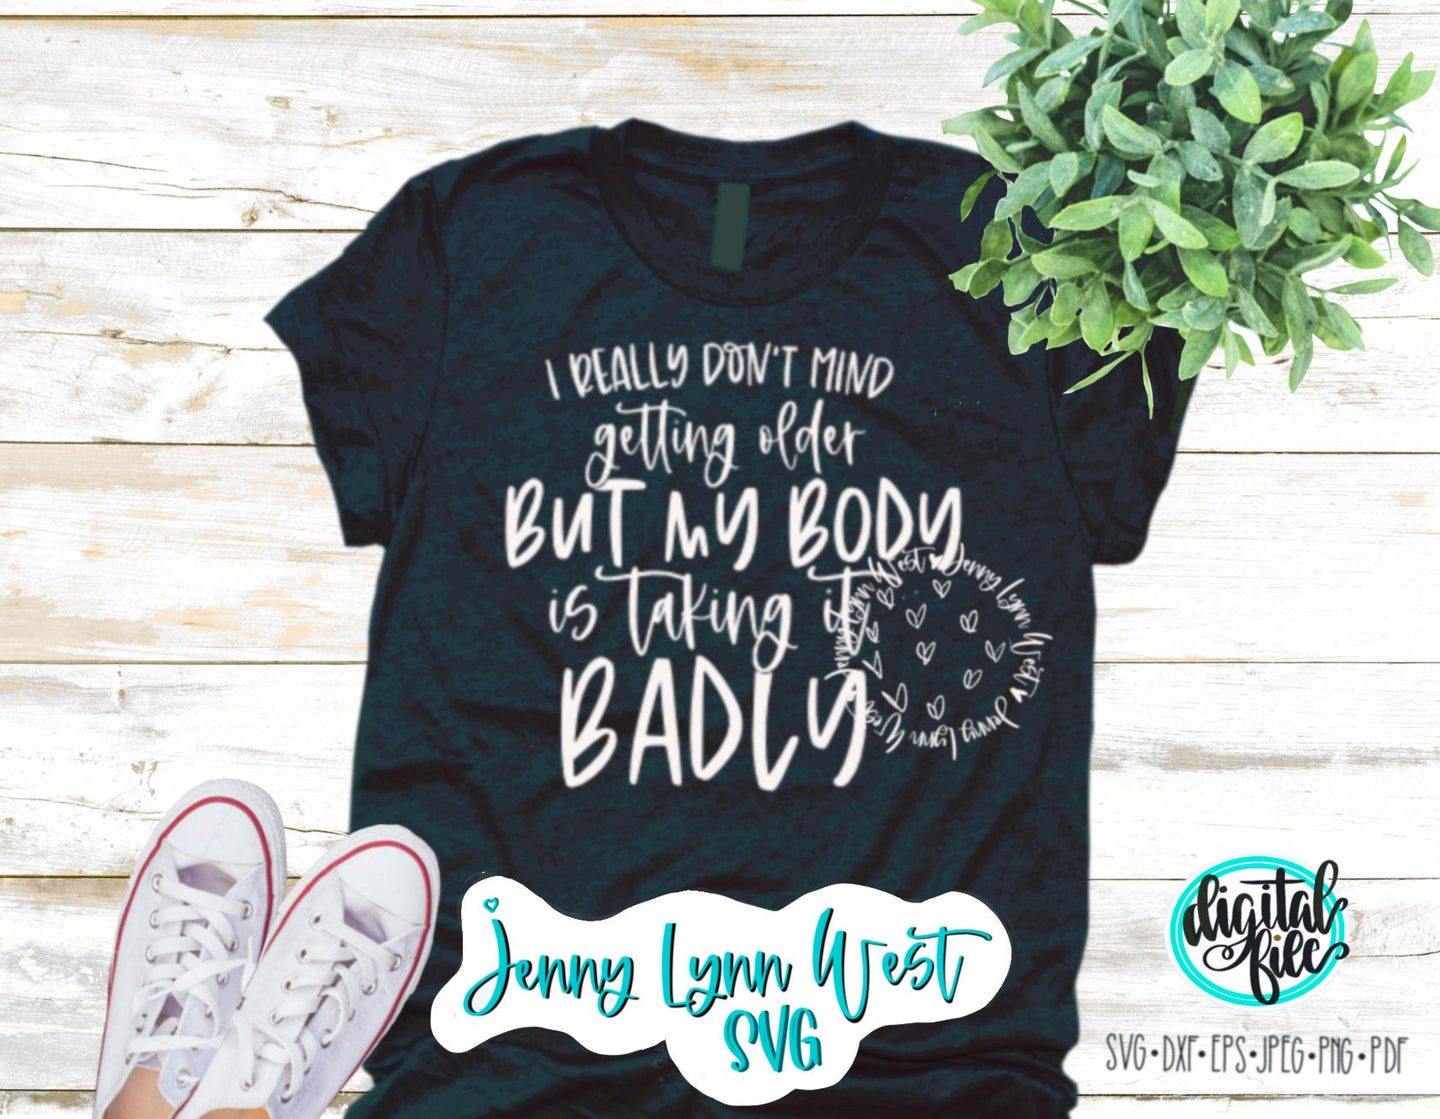 Exercise Funny Shirt SVG Gym Funny Exercise SVG Body Taking Badly Png Screenprint DXF Silhouette Iron On Digital Design Cricut Cut File